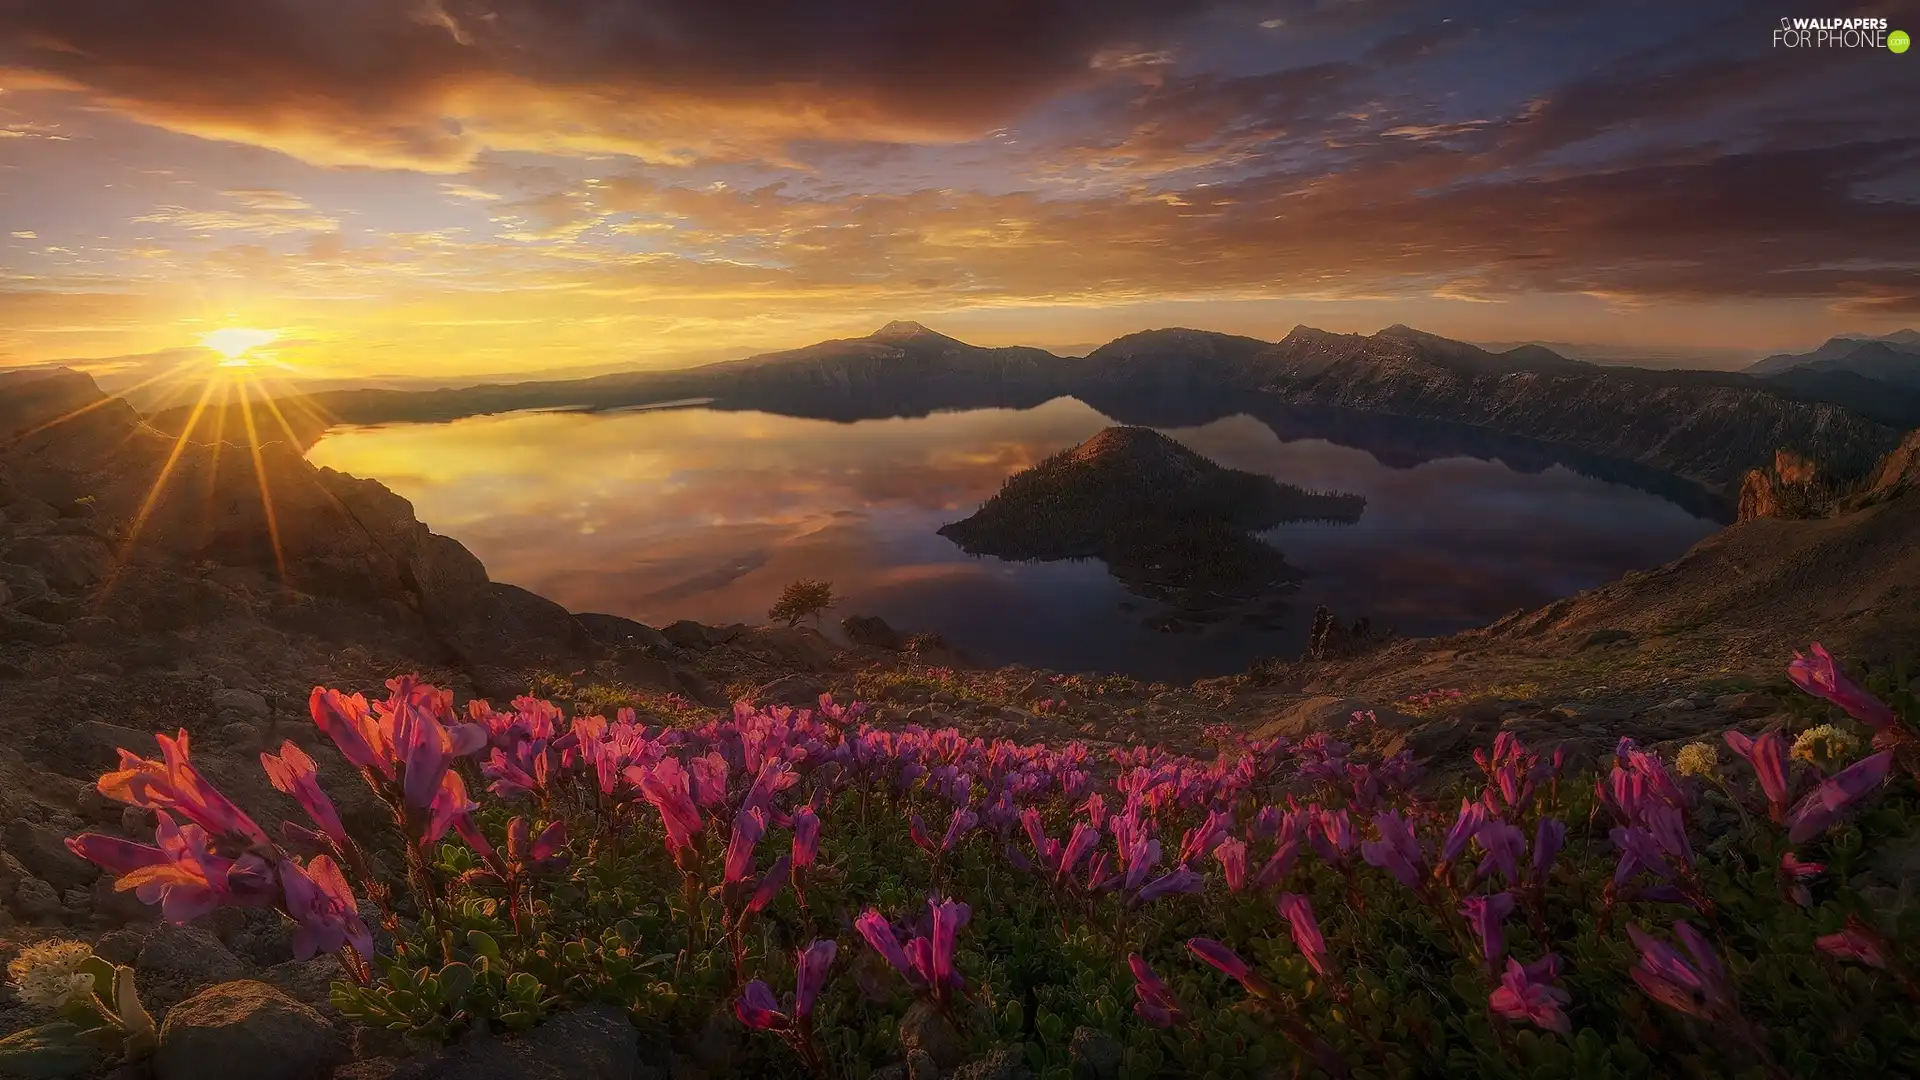 State of Oregon, The United States, Island of Wizard, Crater Lake, rays of the Sun, Flowers, Mountains, Great Sunsets, Crater Lake National Park